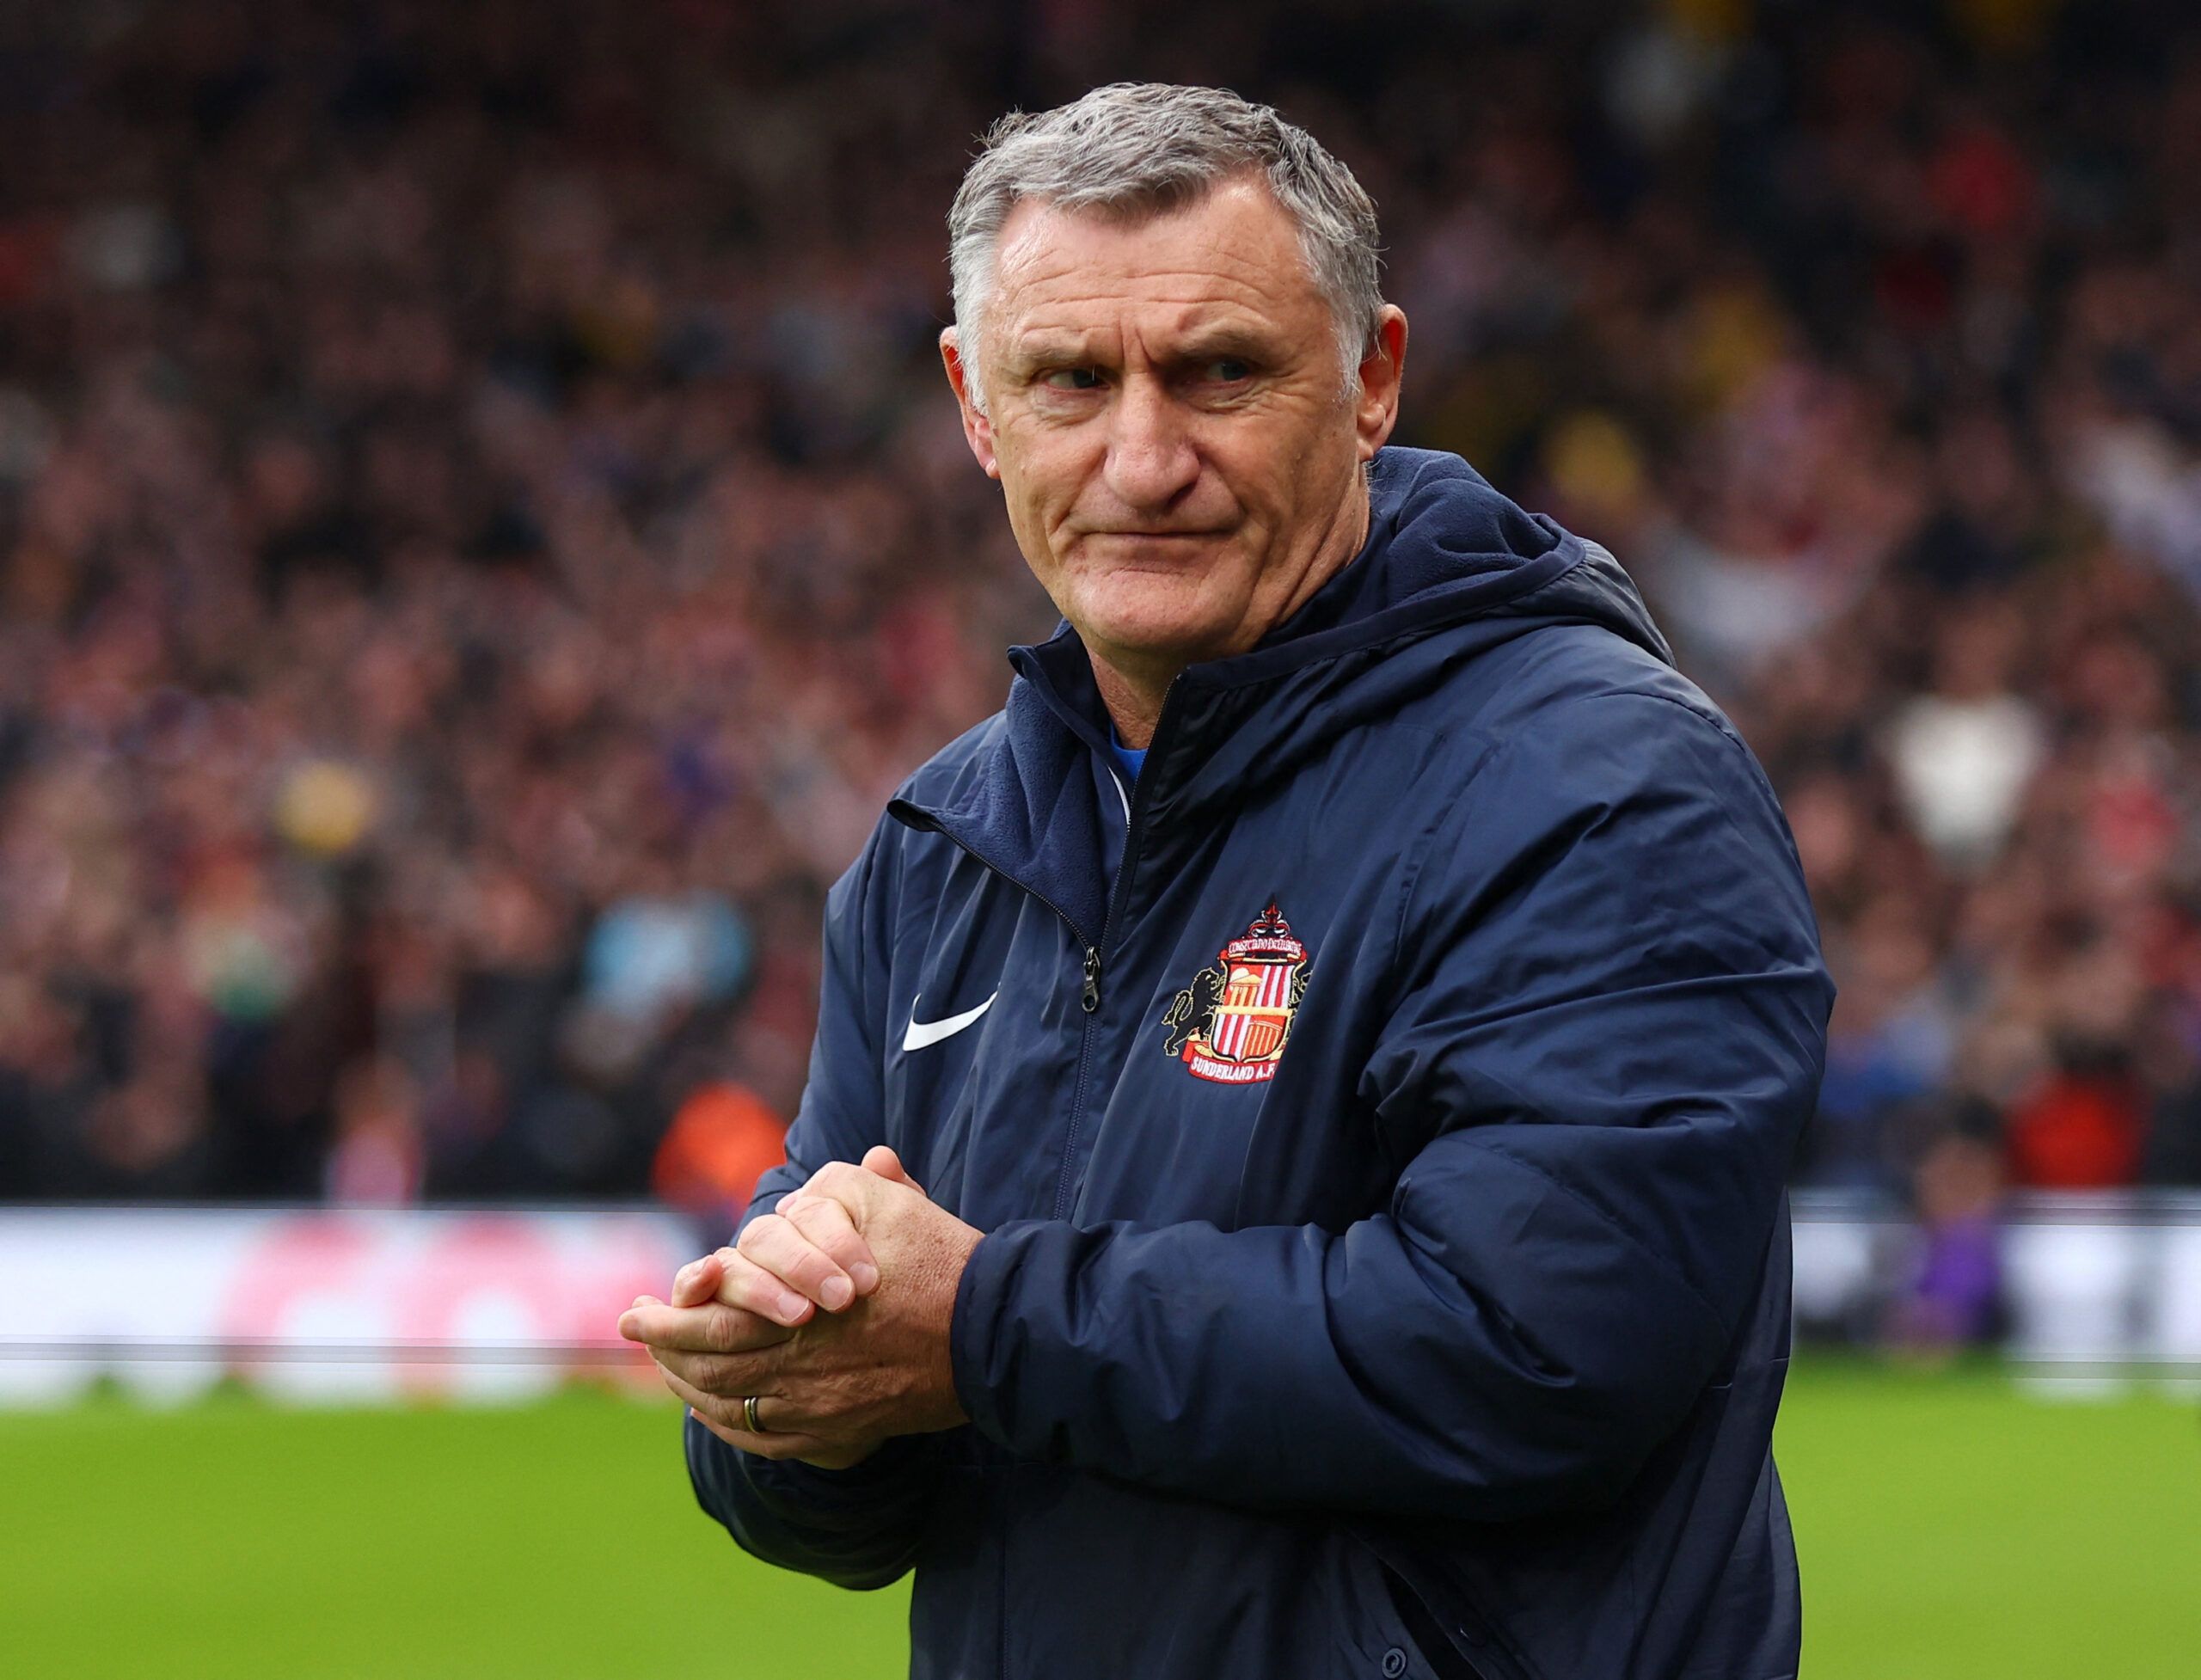 Soccer Football - FA Cup - Fourth Round - Fulham v Sunderland - Craven Cottage, London, Britain - January 28, 2023 Sunderland manager Tony Mowbray before the match REUTERS/David Klein